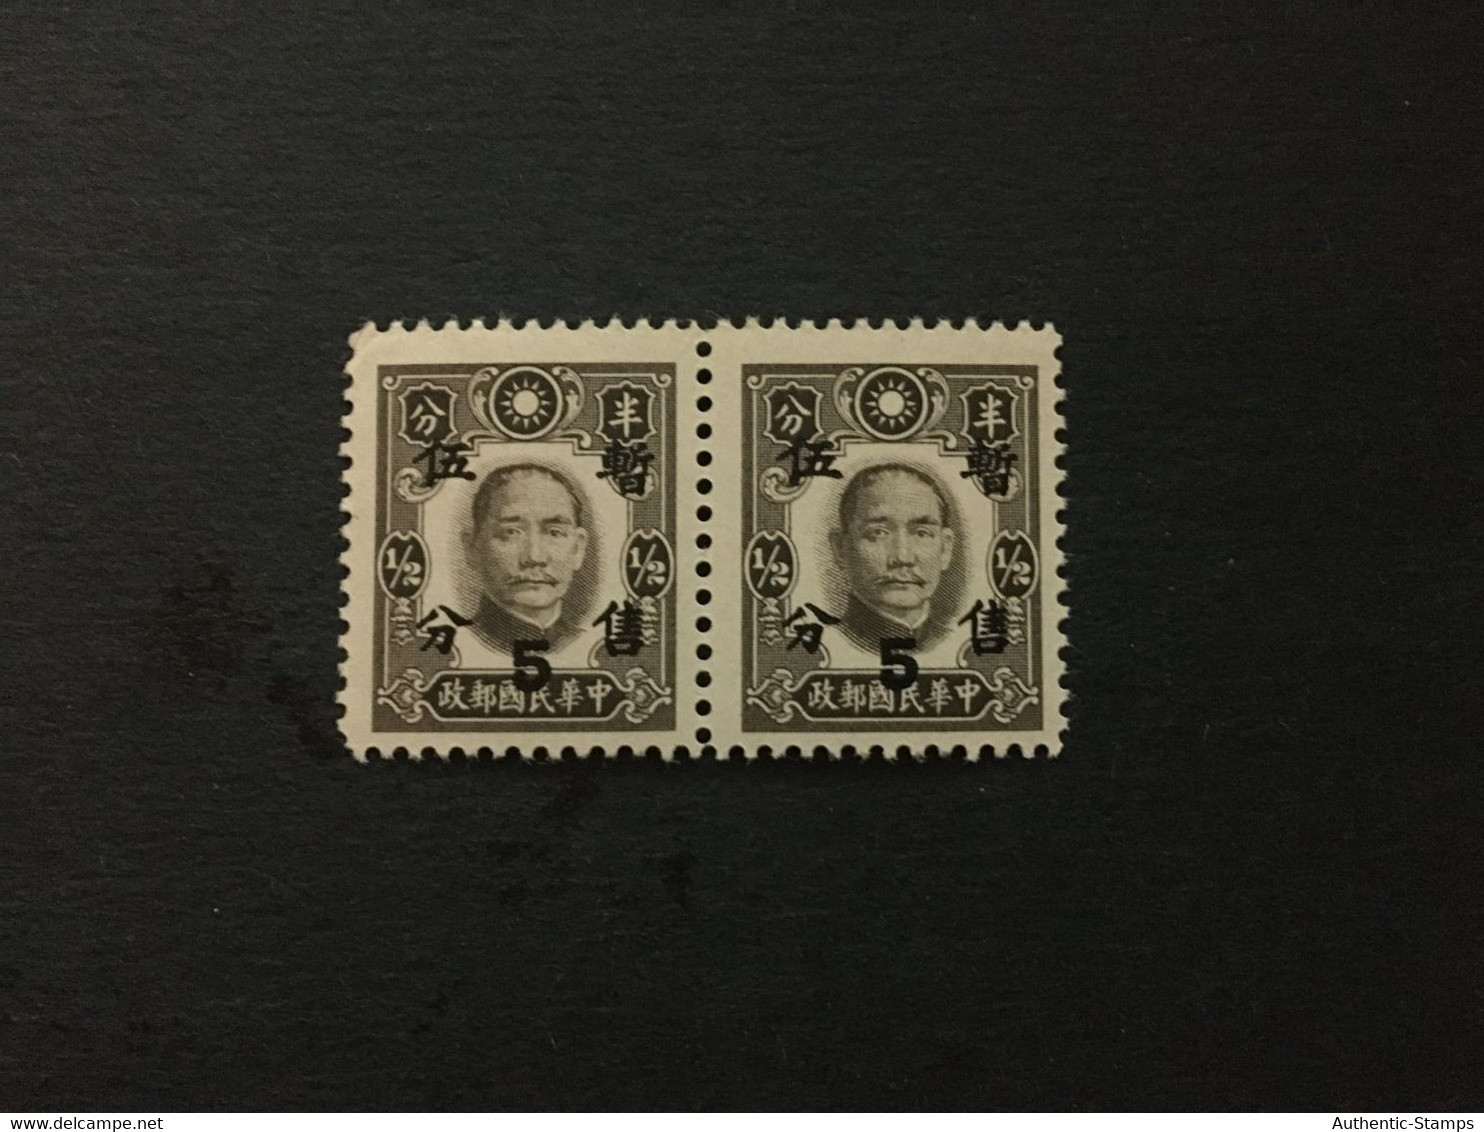 CHINA  STAMP BLOCK, MNH, JAPANESE OCCUPATION,Overprinted With “Temporarity Sold For”and Surcharged，CINA,CHINE,LIST 310 - 1943-45 Shanghai & Nanchino